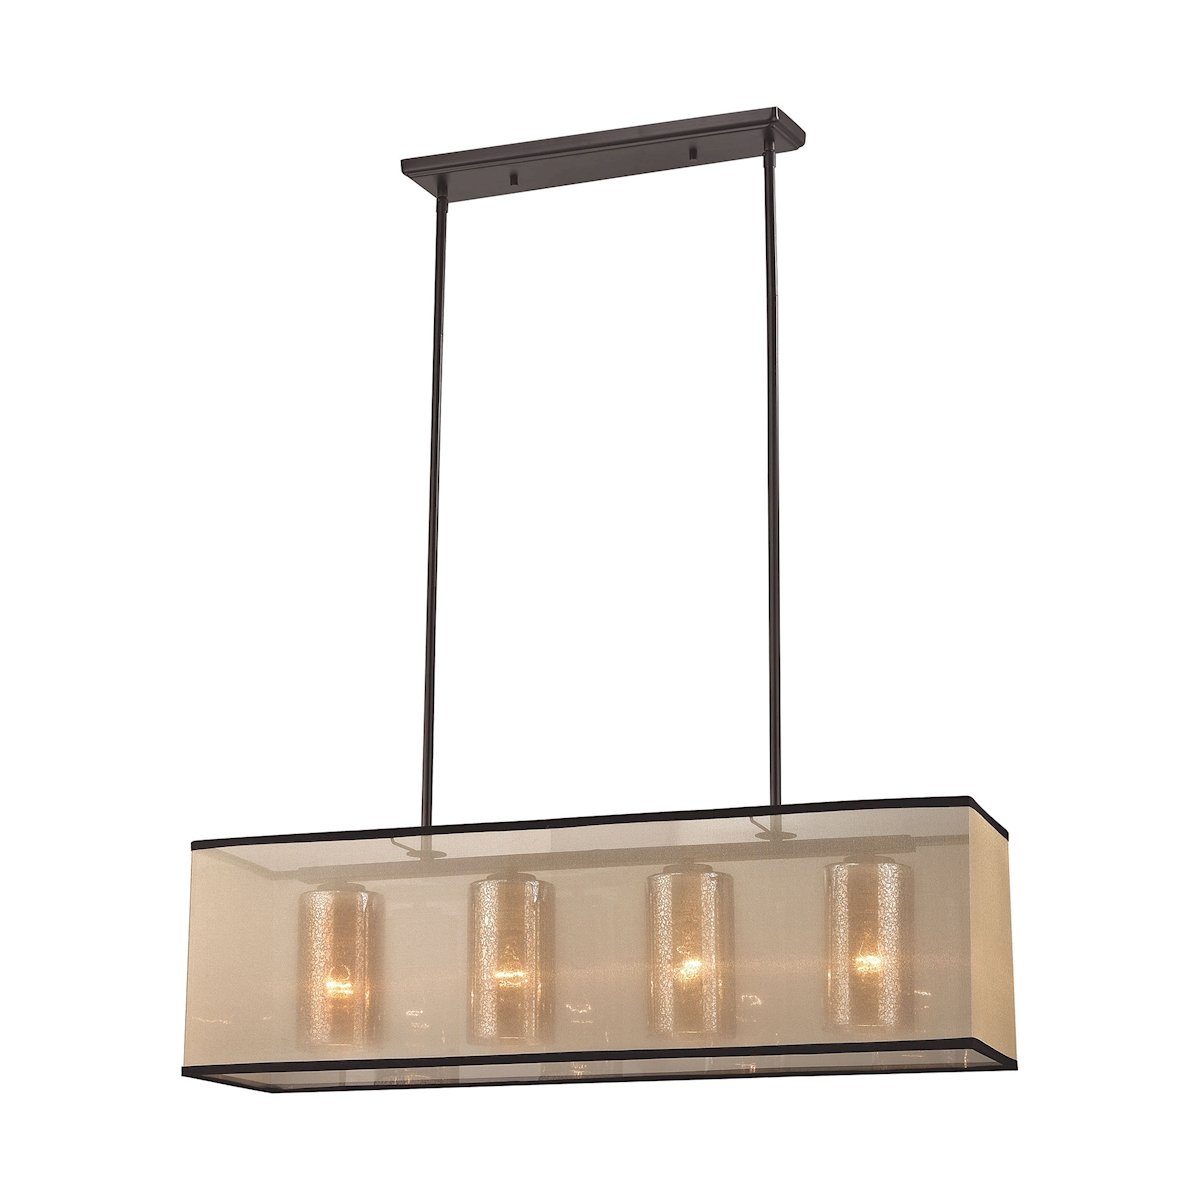 Diffusion 34"w 4 Light Chandelier In Oil Rubbed Bronze Ceiling Elk Lighting Default Value 